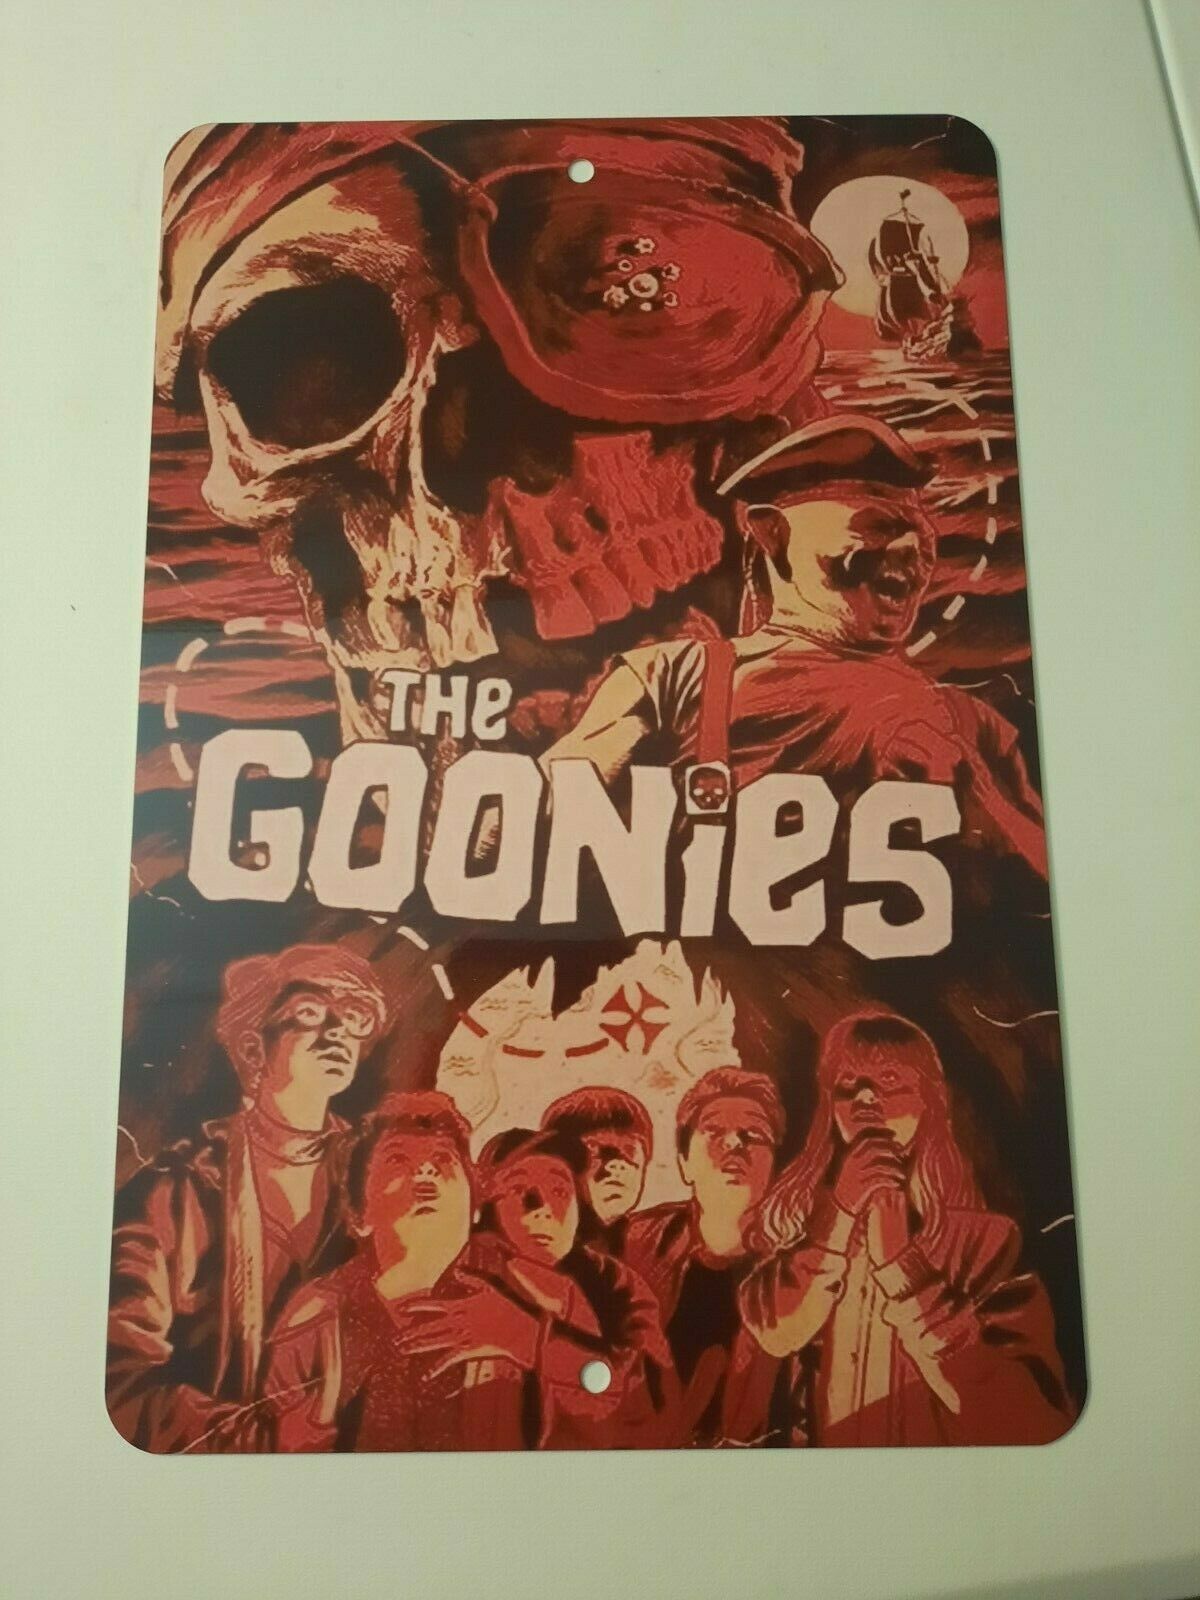 The Goonies Retro 80s Movie Poster Artwork 8x12 Metal Wall Sign